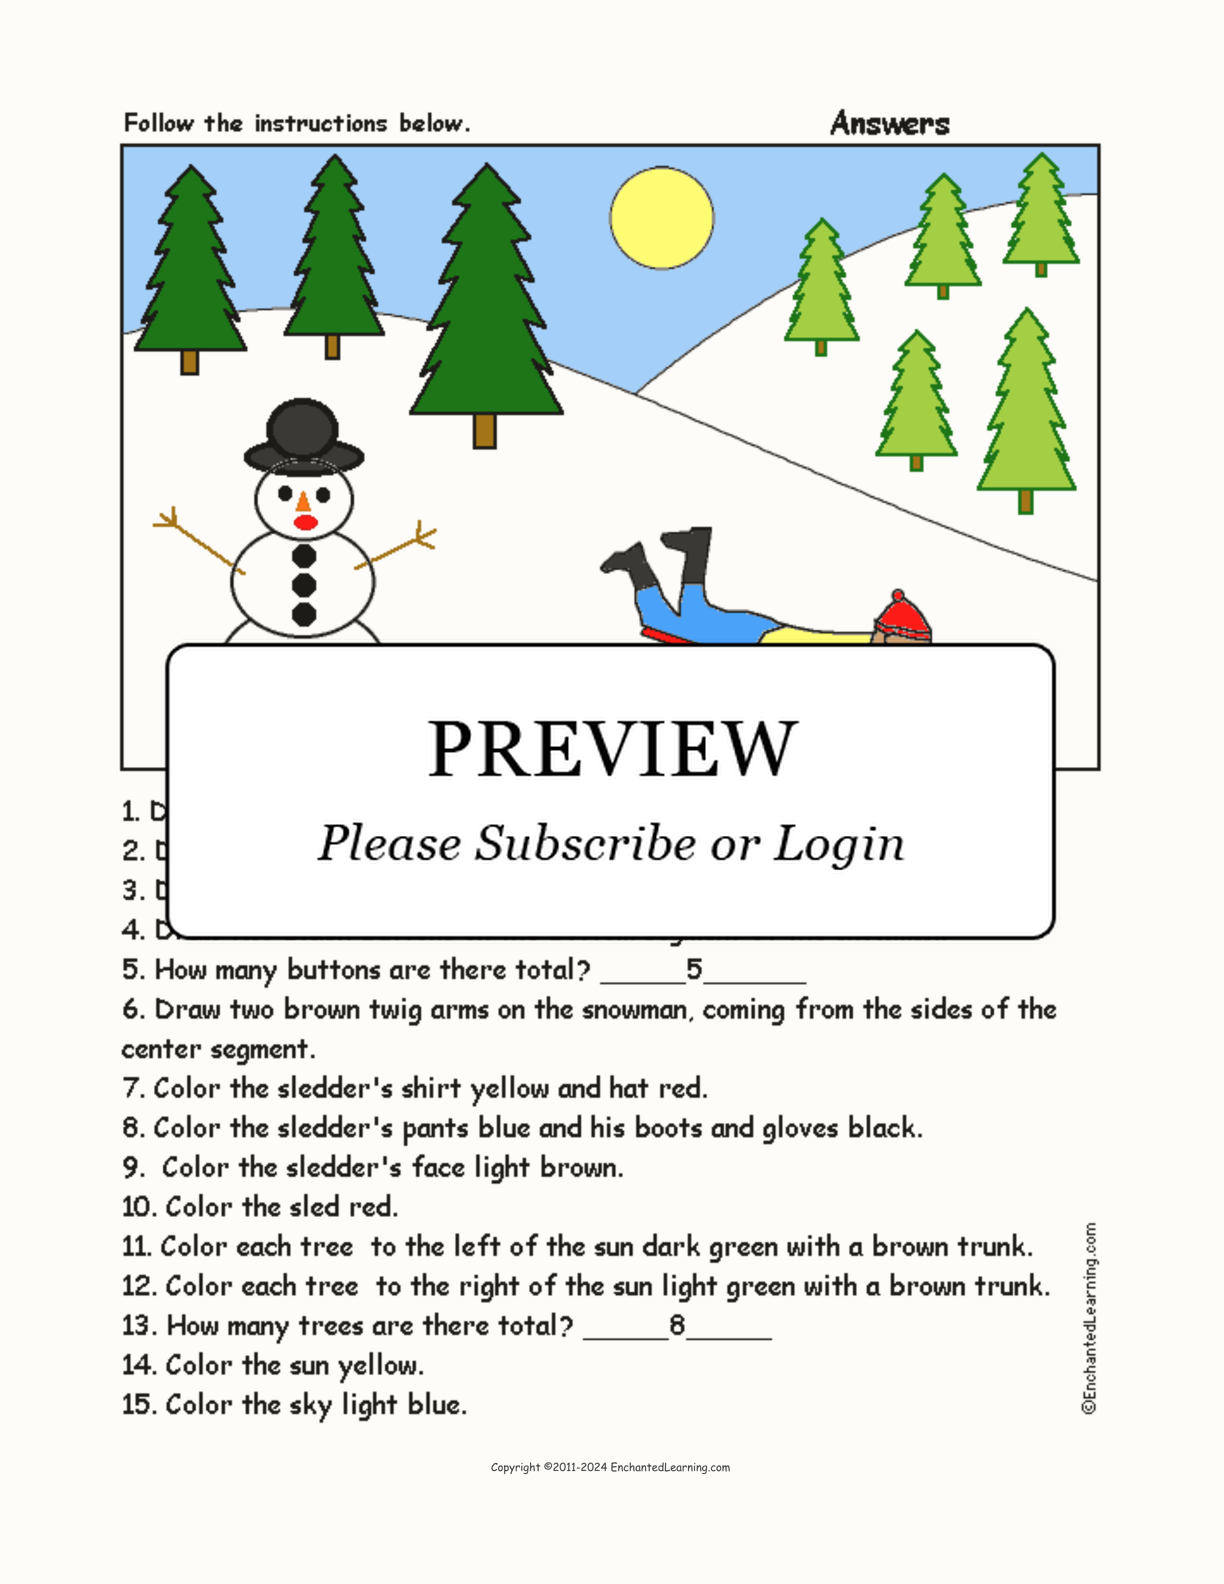 Winter Scene - Follow the Instructions interactive worksheet page 2